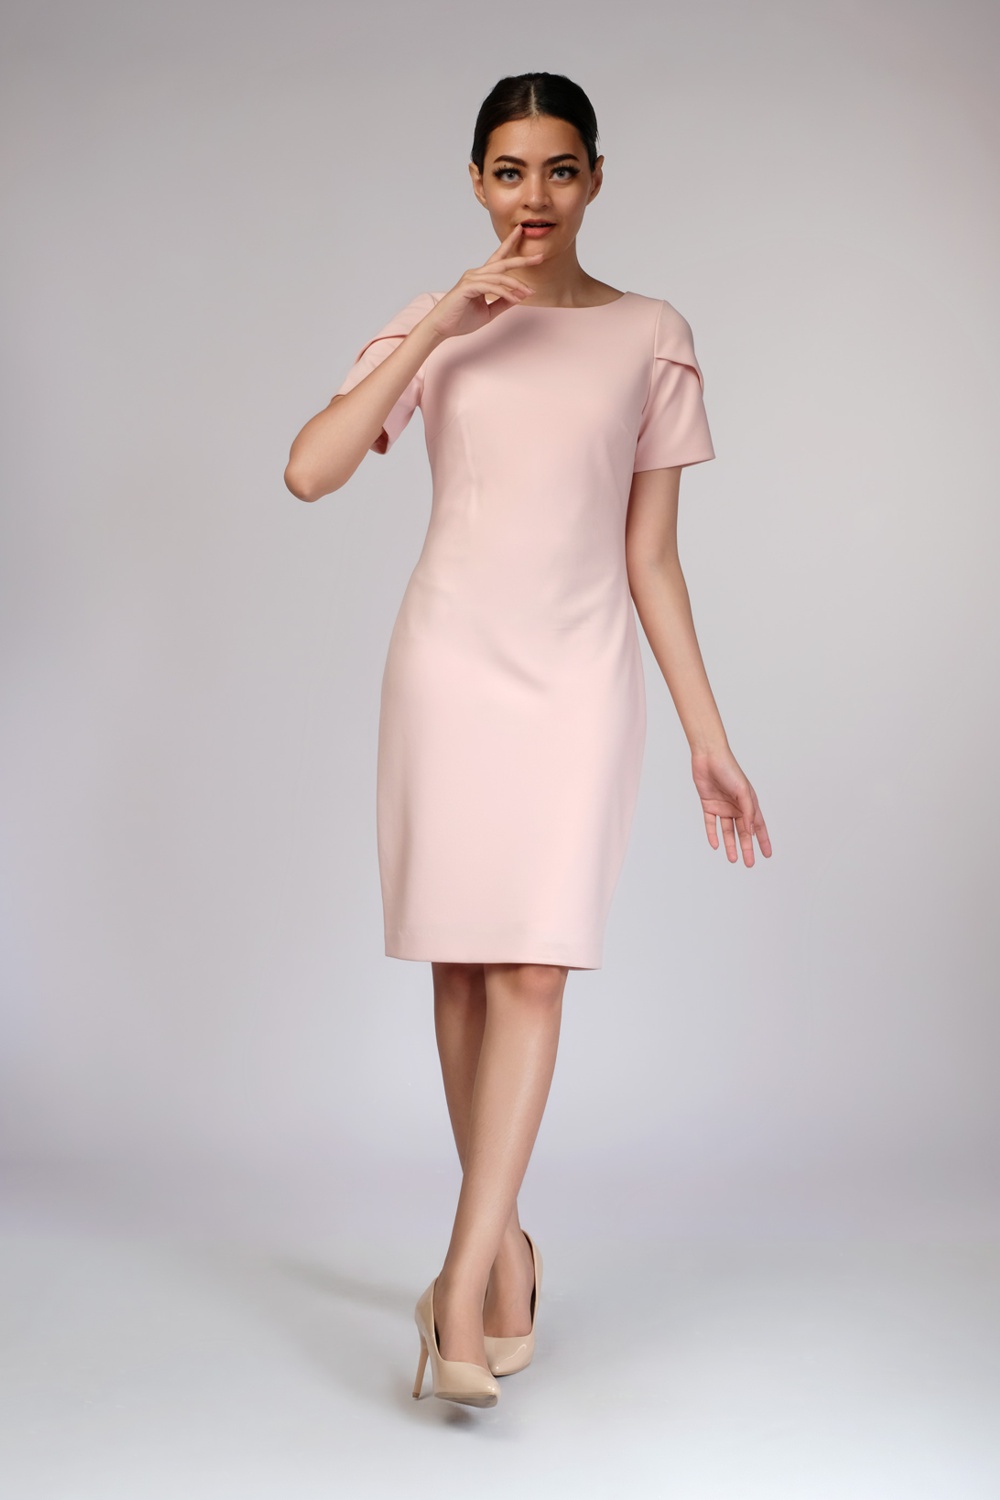 Soft Pink Dress With Ruffle Sleeve